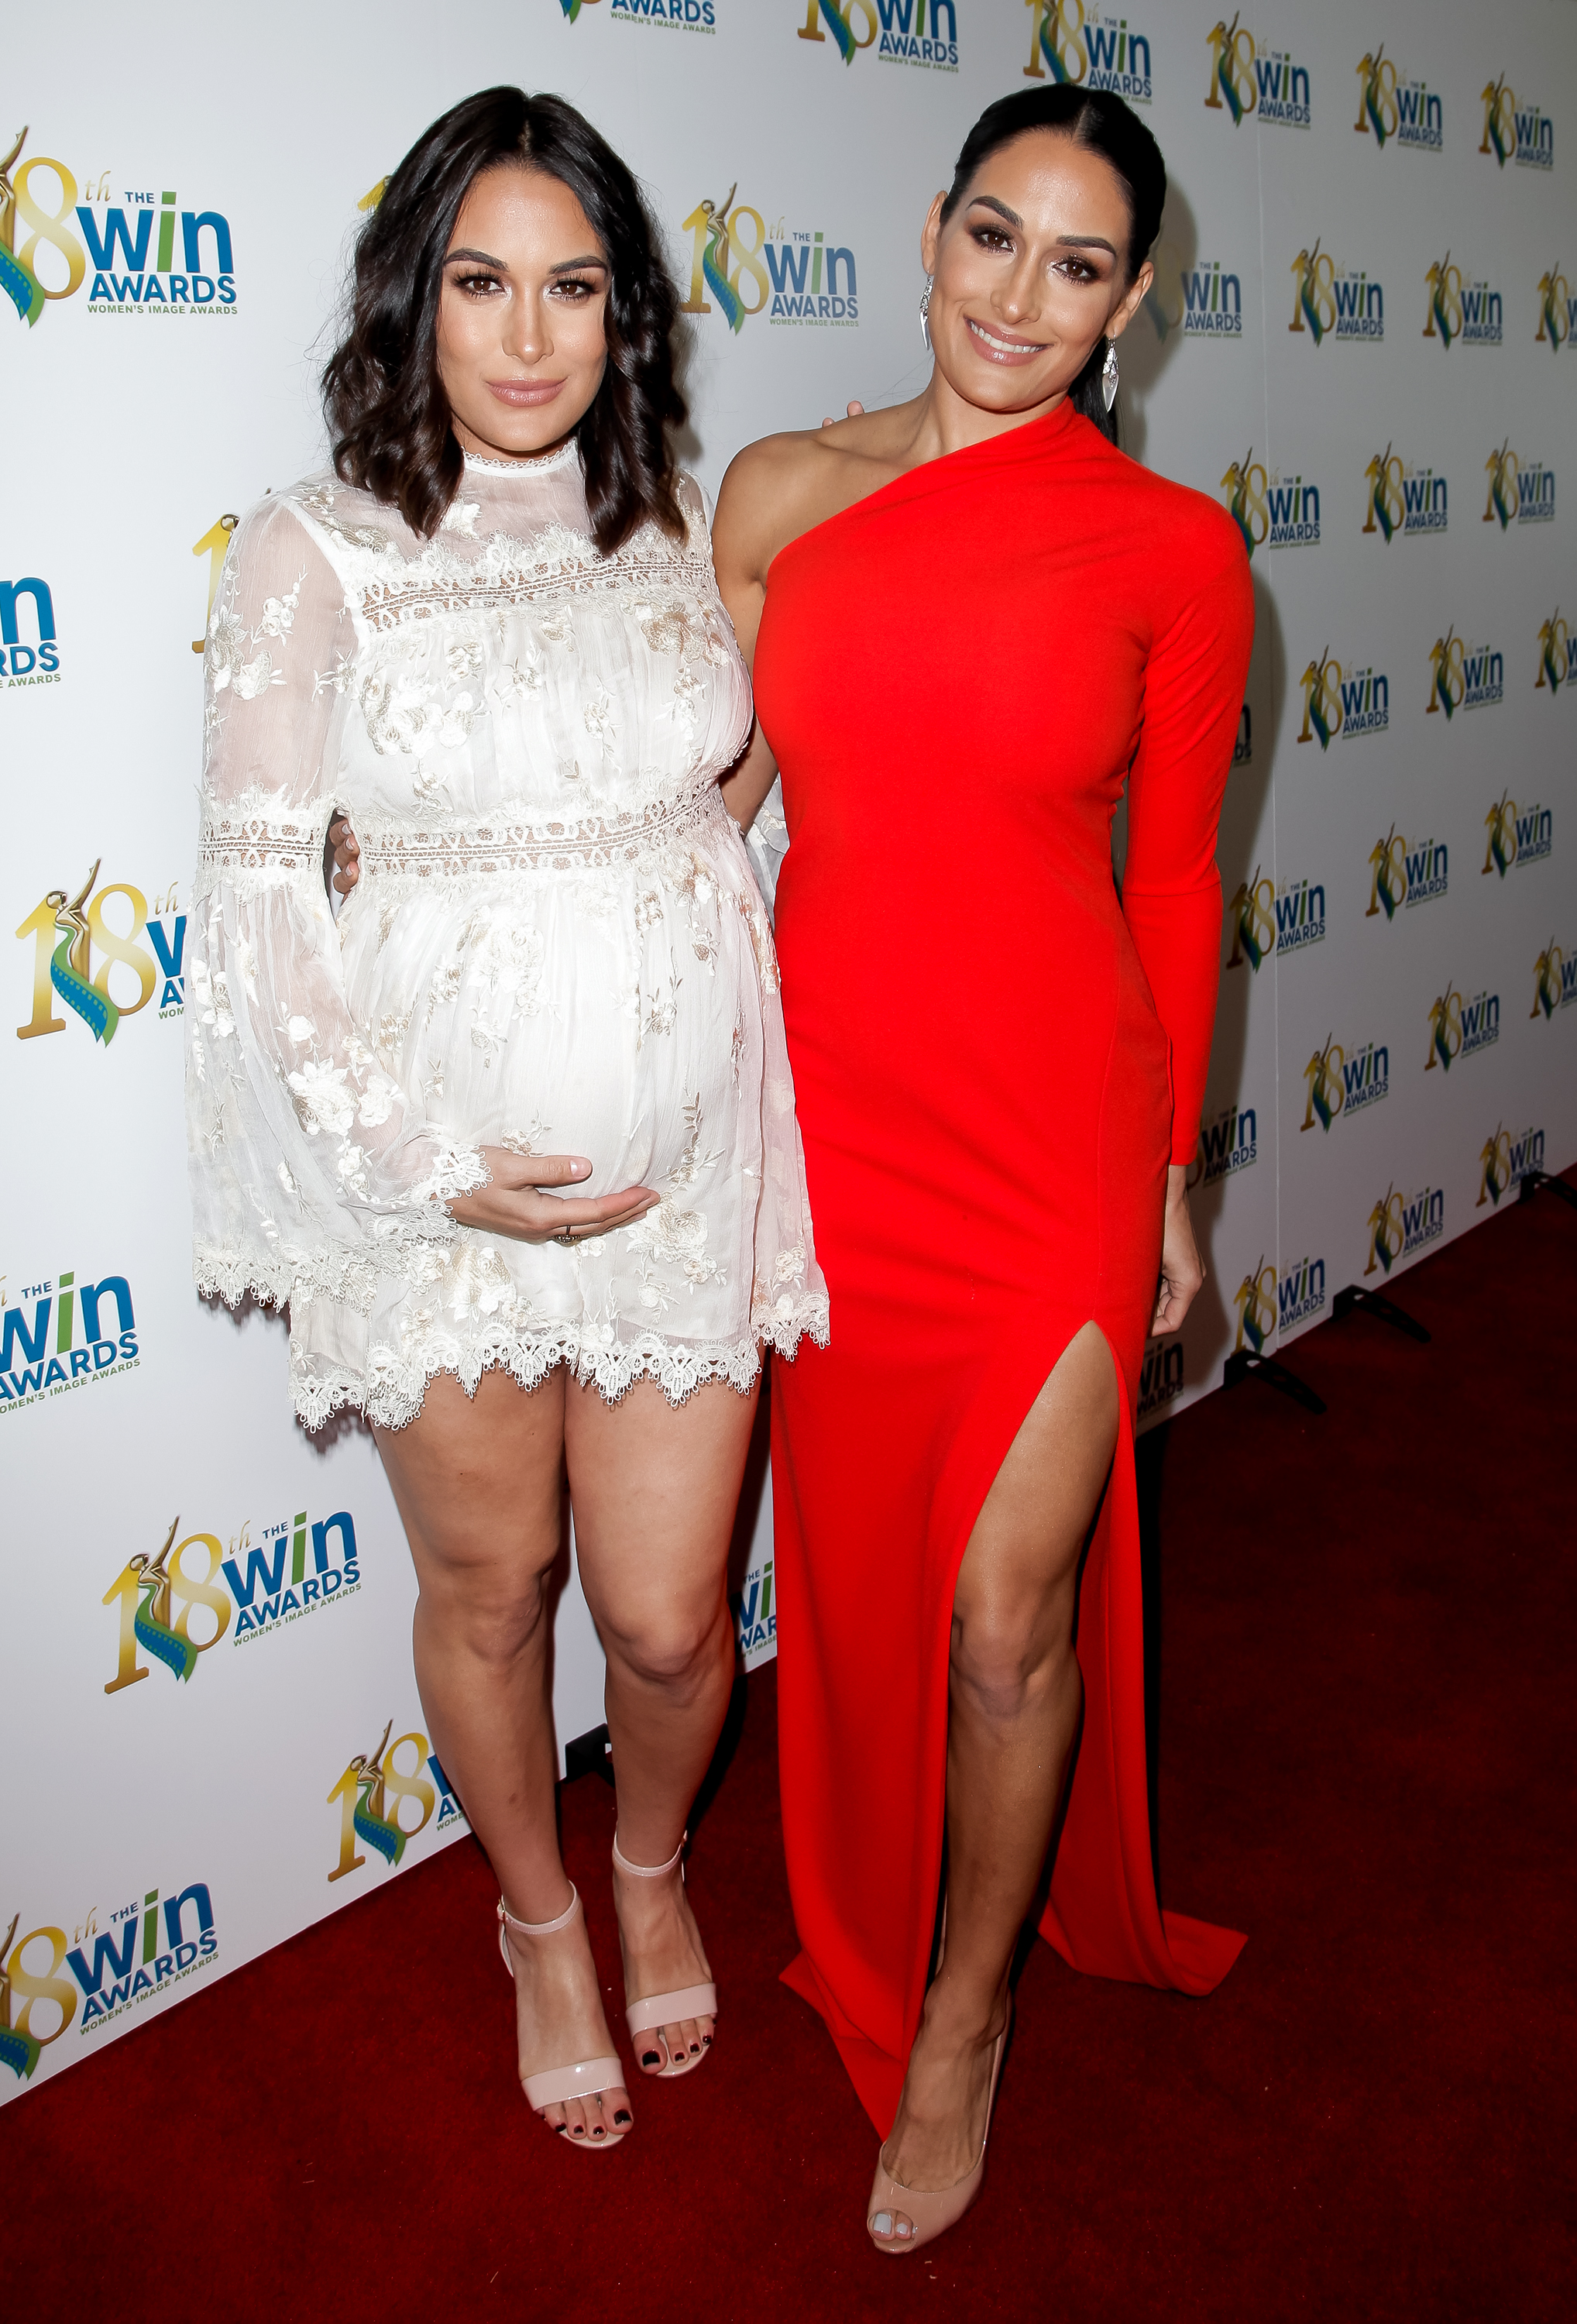 The Bella Twins Image Awards #2